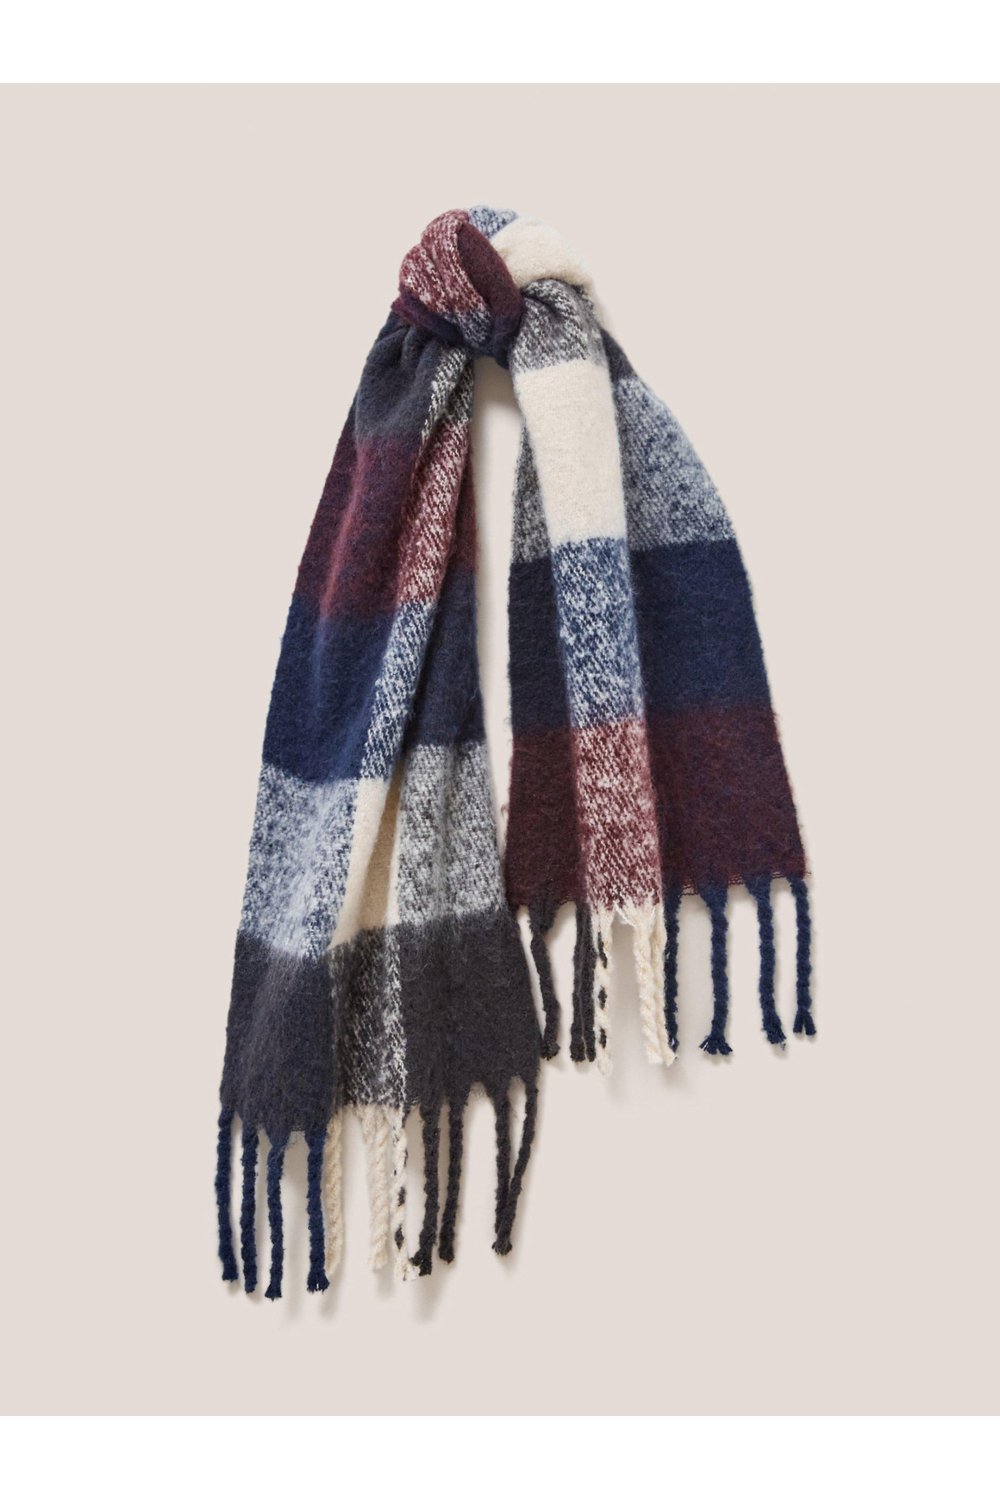 White Stuff Shelly Brushed Check Scarf 440119 in NAVY MULTI